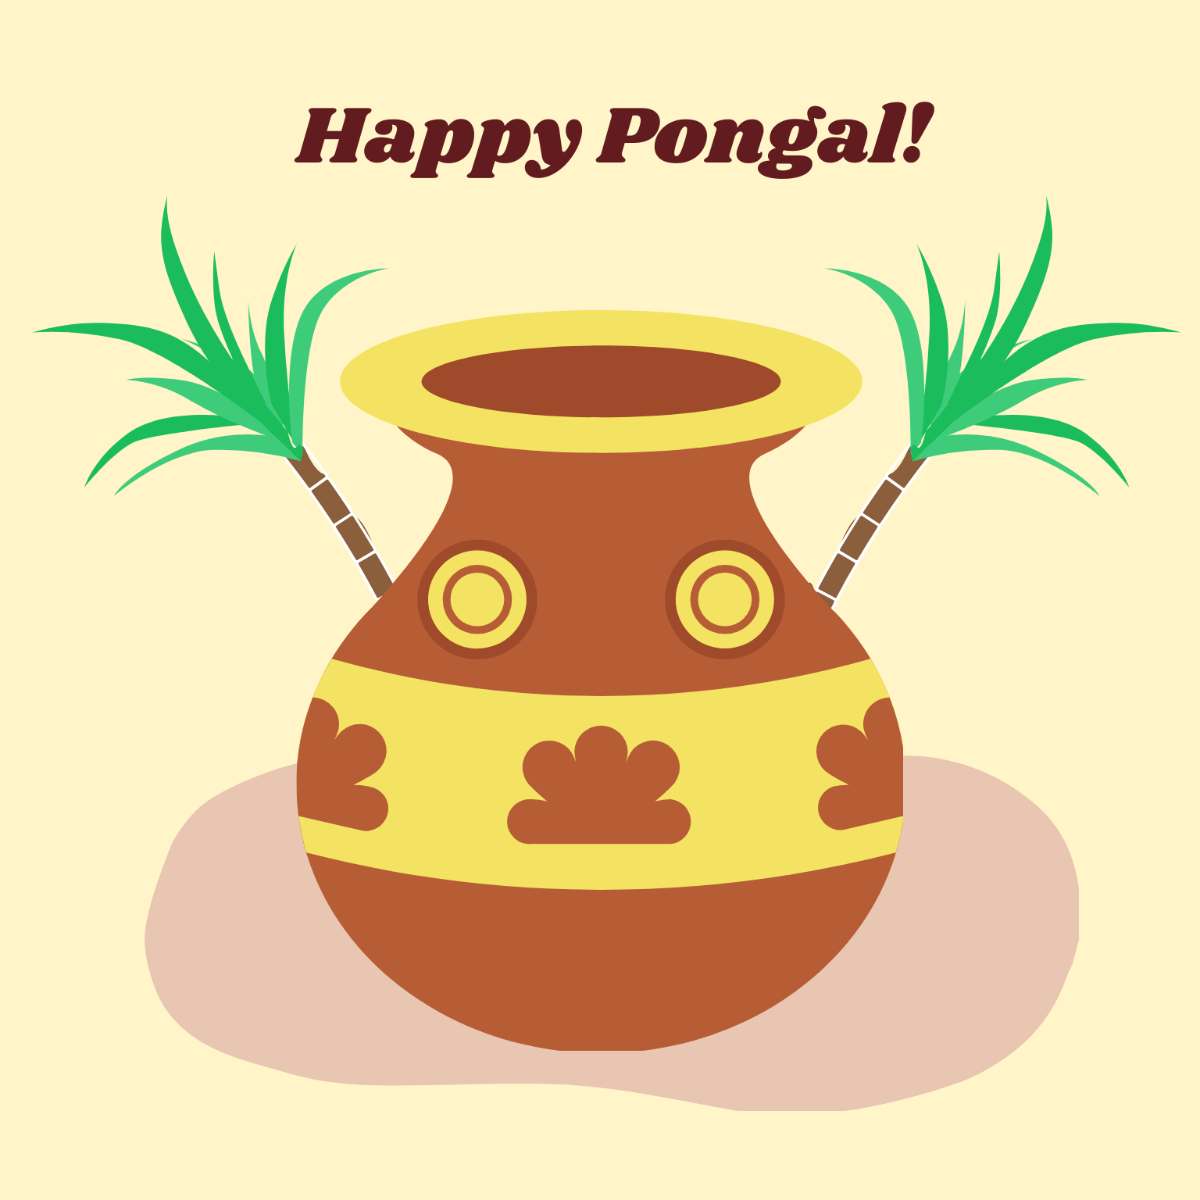 100+] Happy Pongal Wallpapers | Wallpapers.com